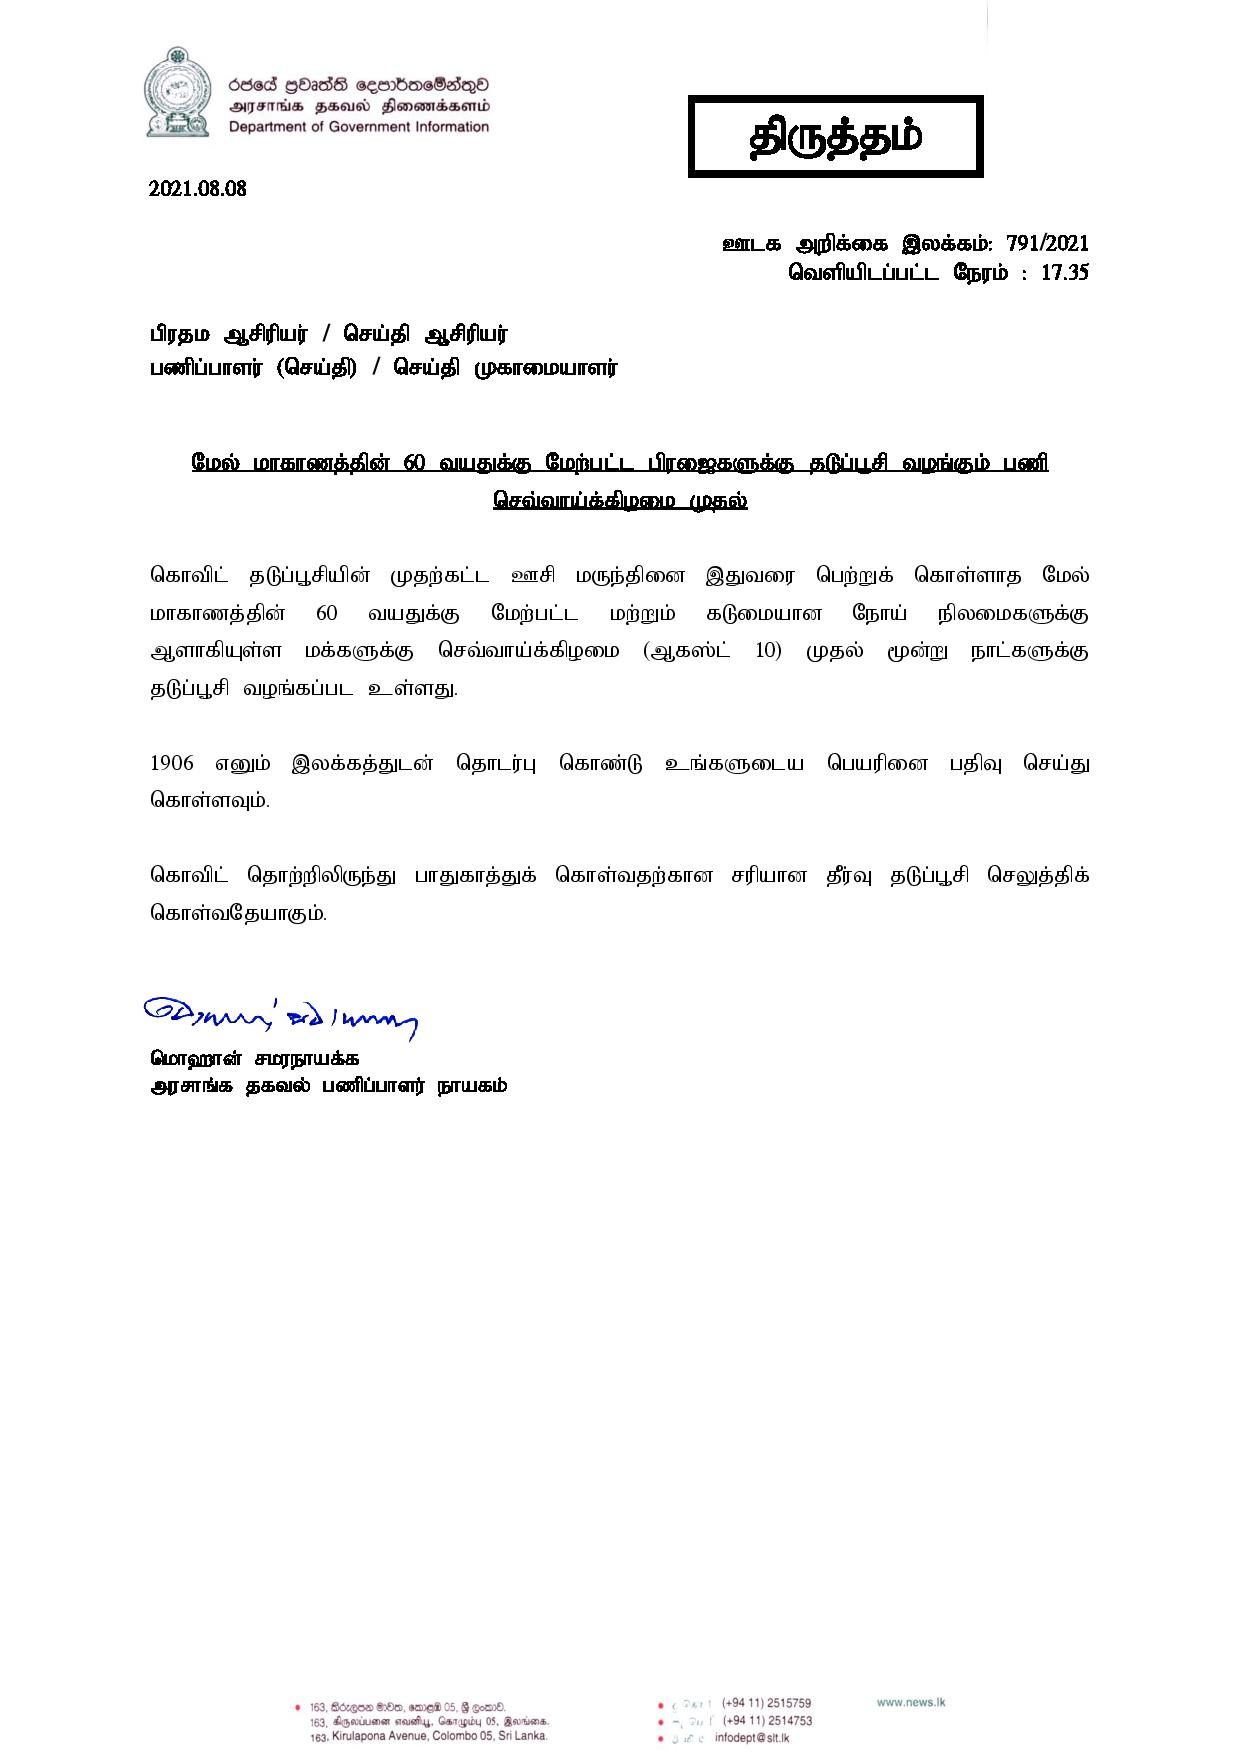 Press Release 791 Tamil Correction 1 page 001